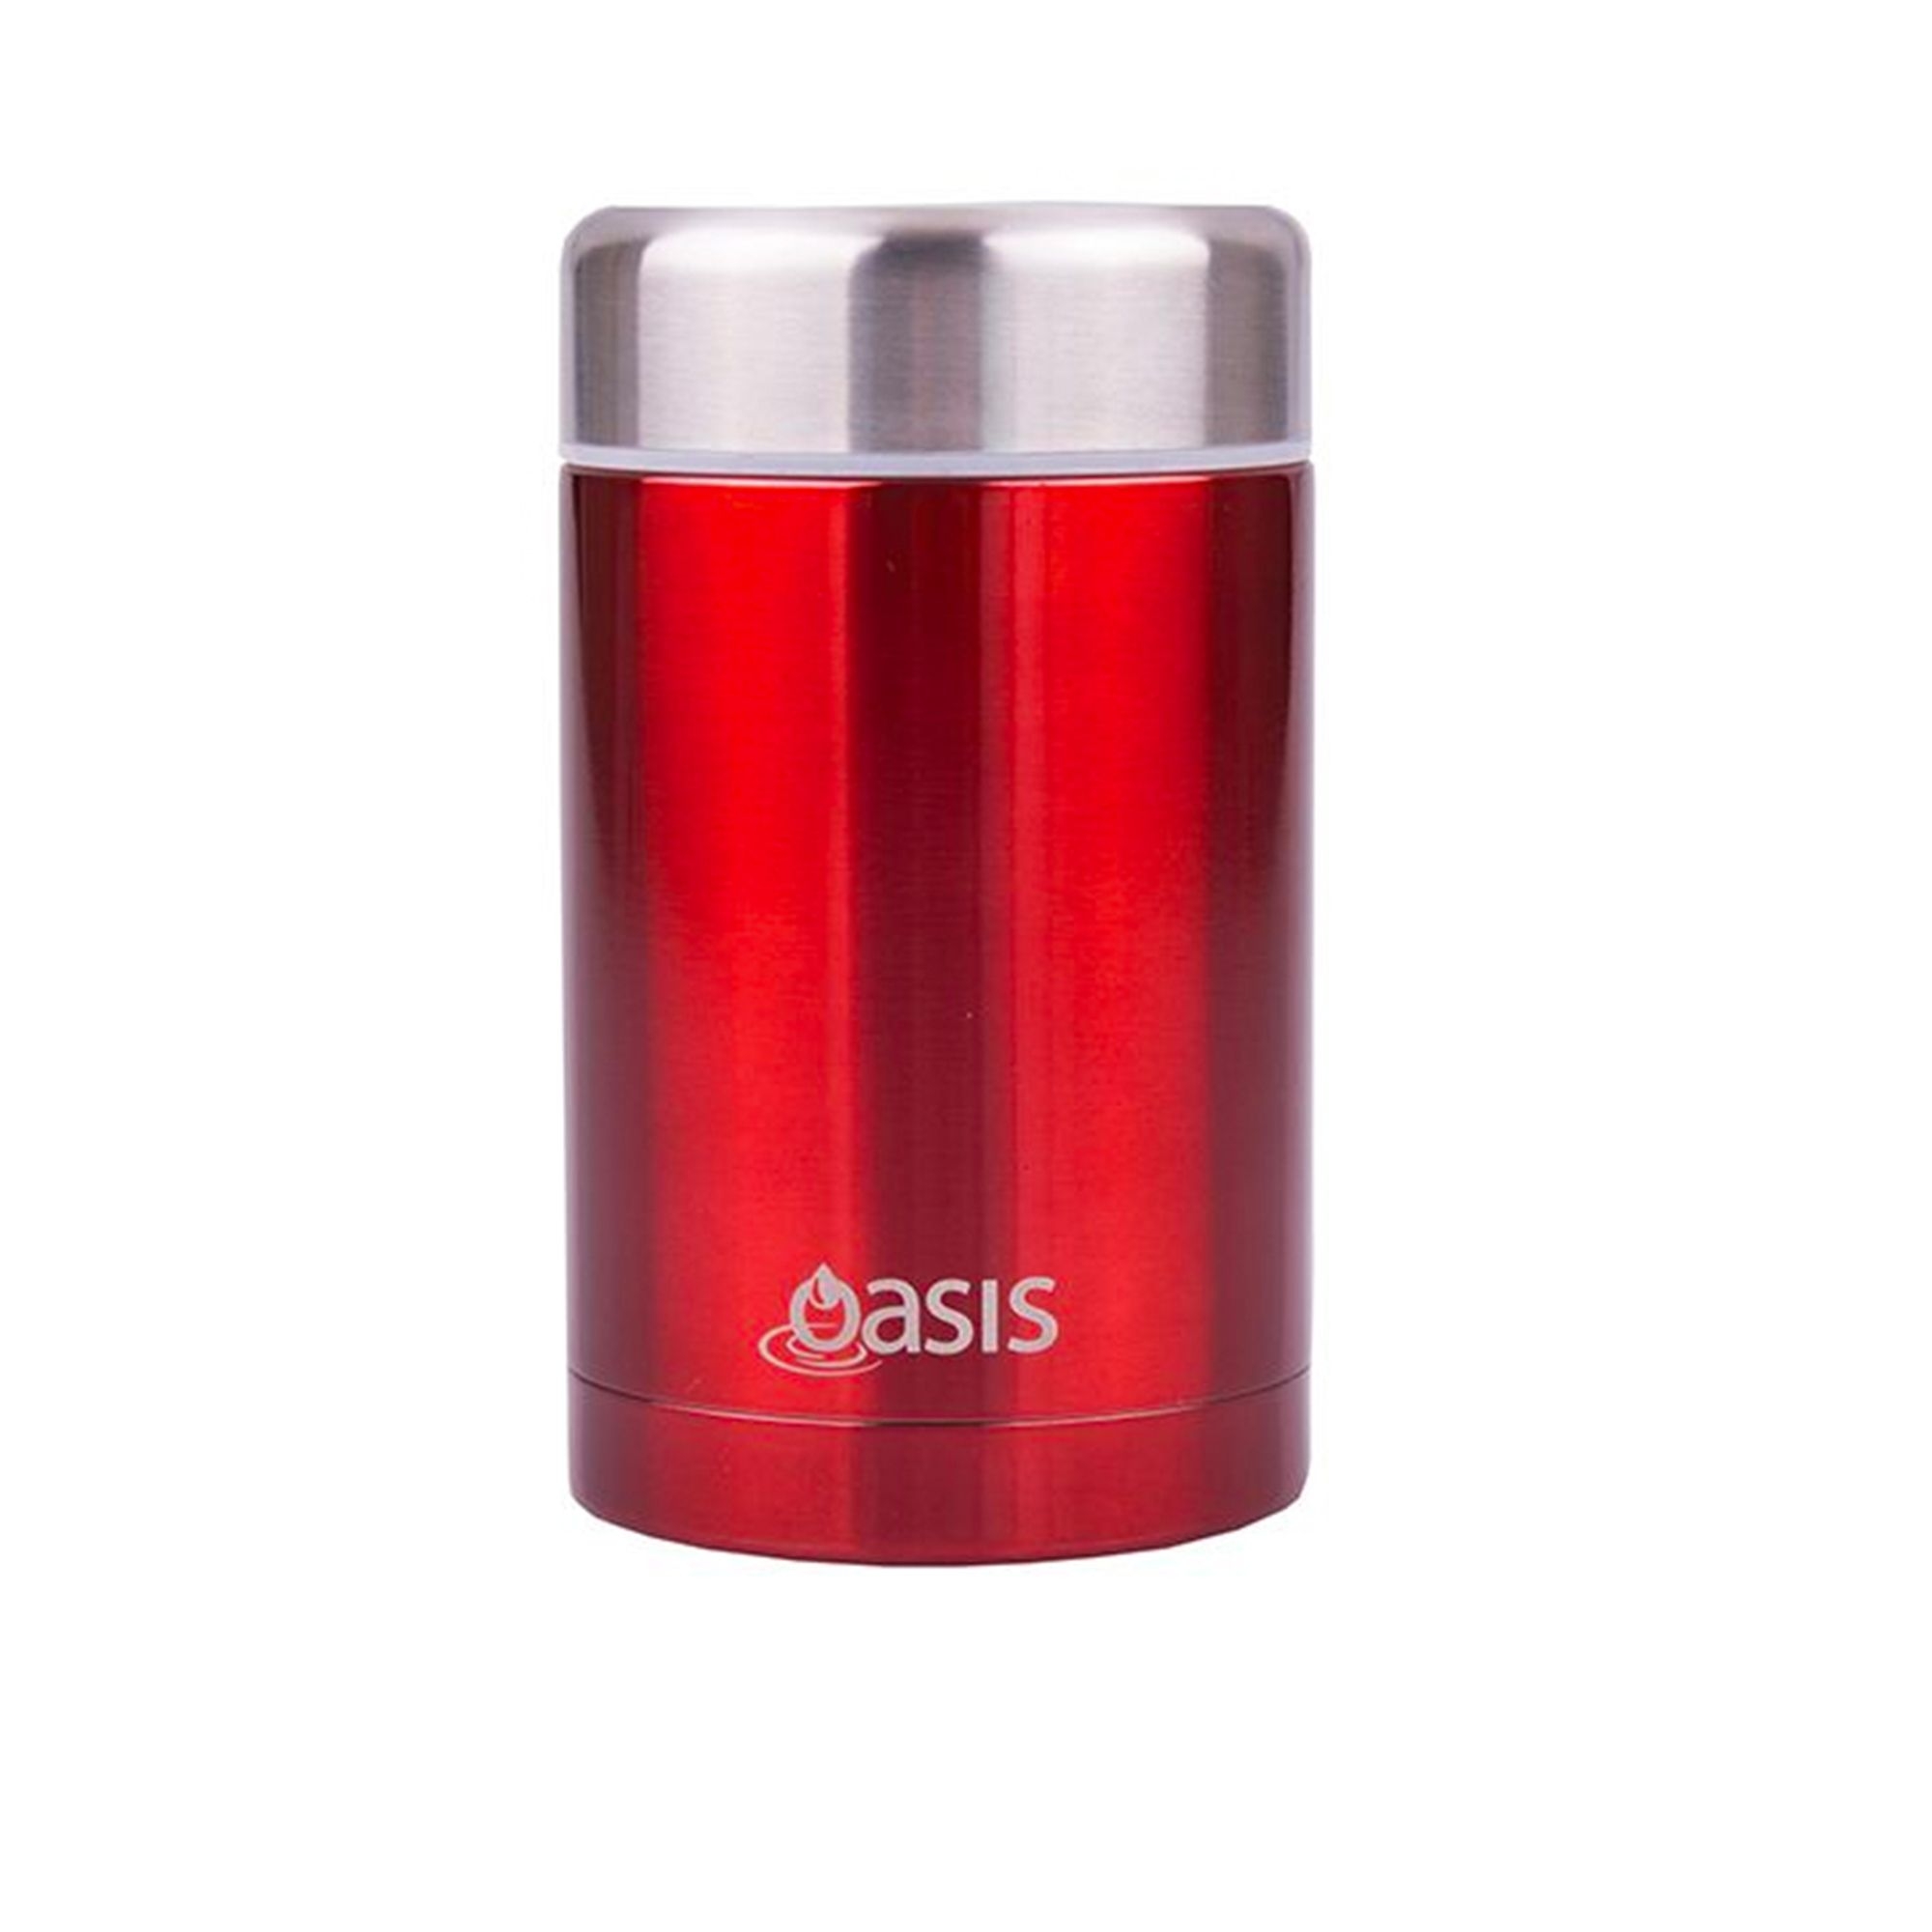 Oasis Insulated Food Flask 450ml Red Image 1